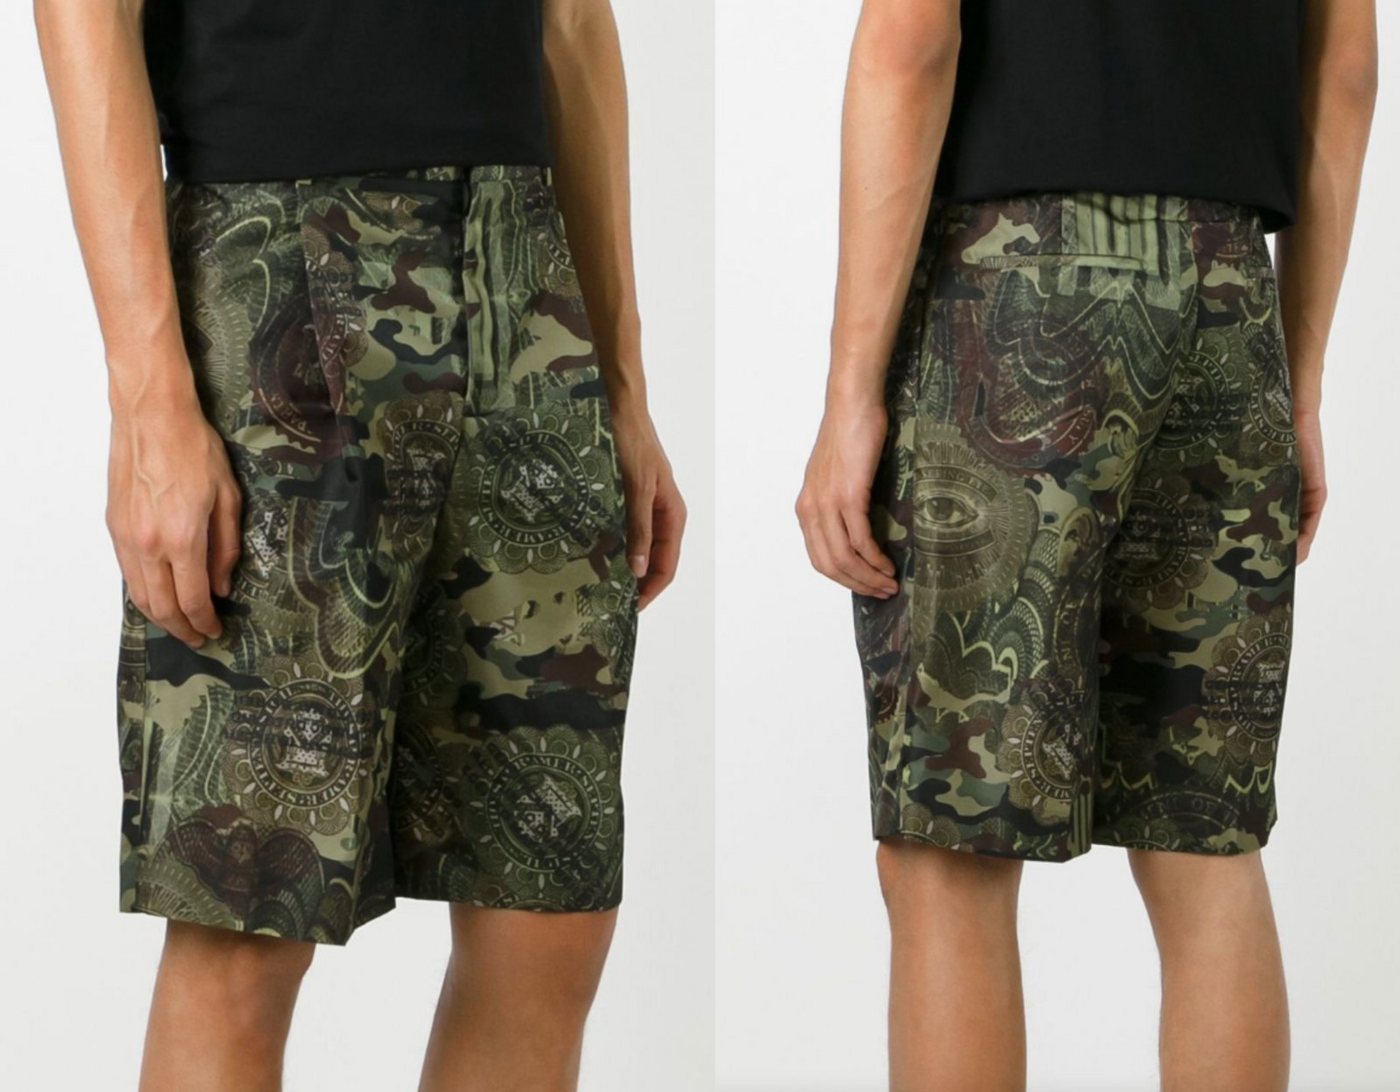 GIVENCHY Shorts Givenchy Mens Iconic Cult Soldout Camouflage Print Bermuda Hose Shorts von GIVENCHY